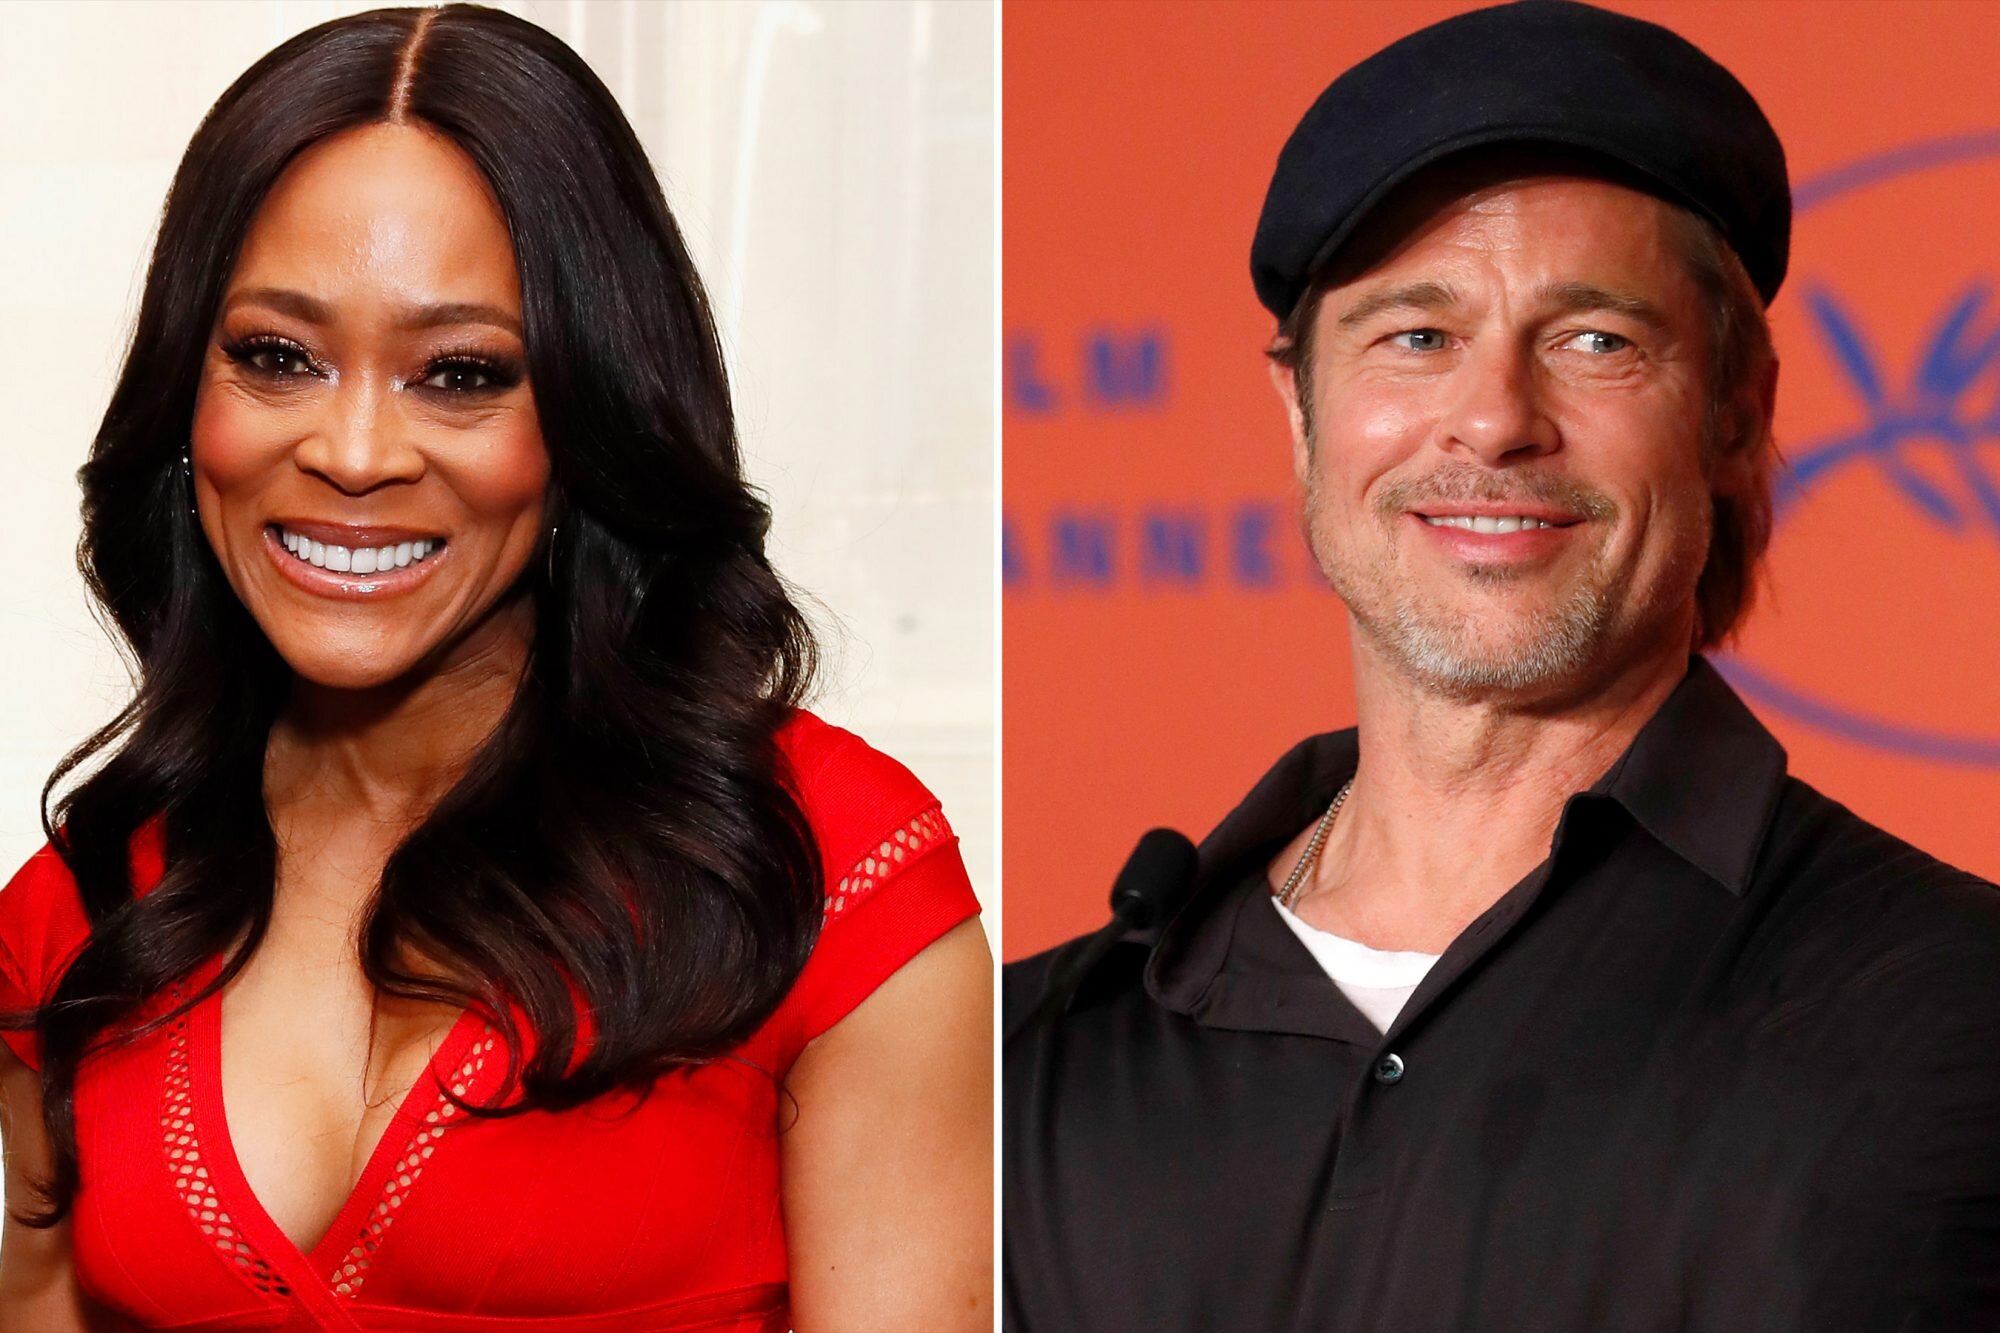 Robin Givens Head of the Class Star Has a Biracial Son with Murphy Jensen The Tennis Champ!